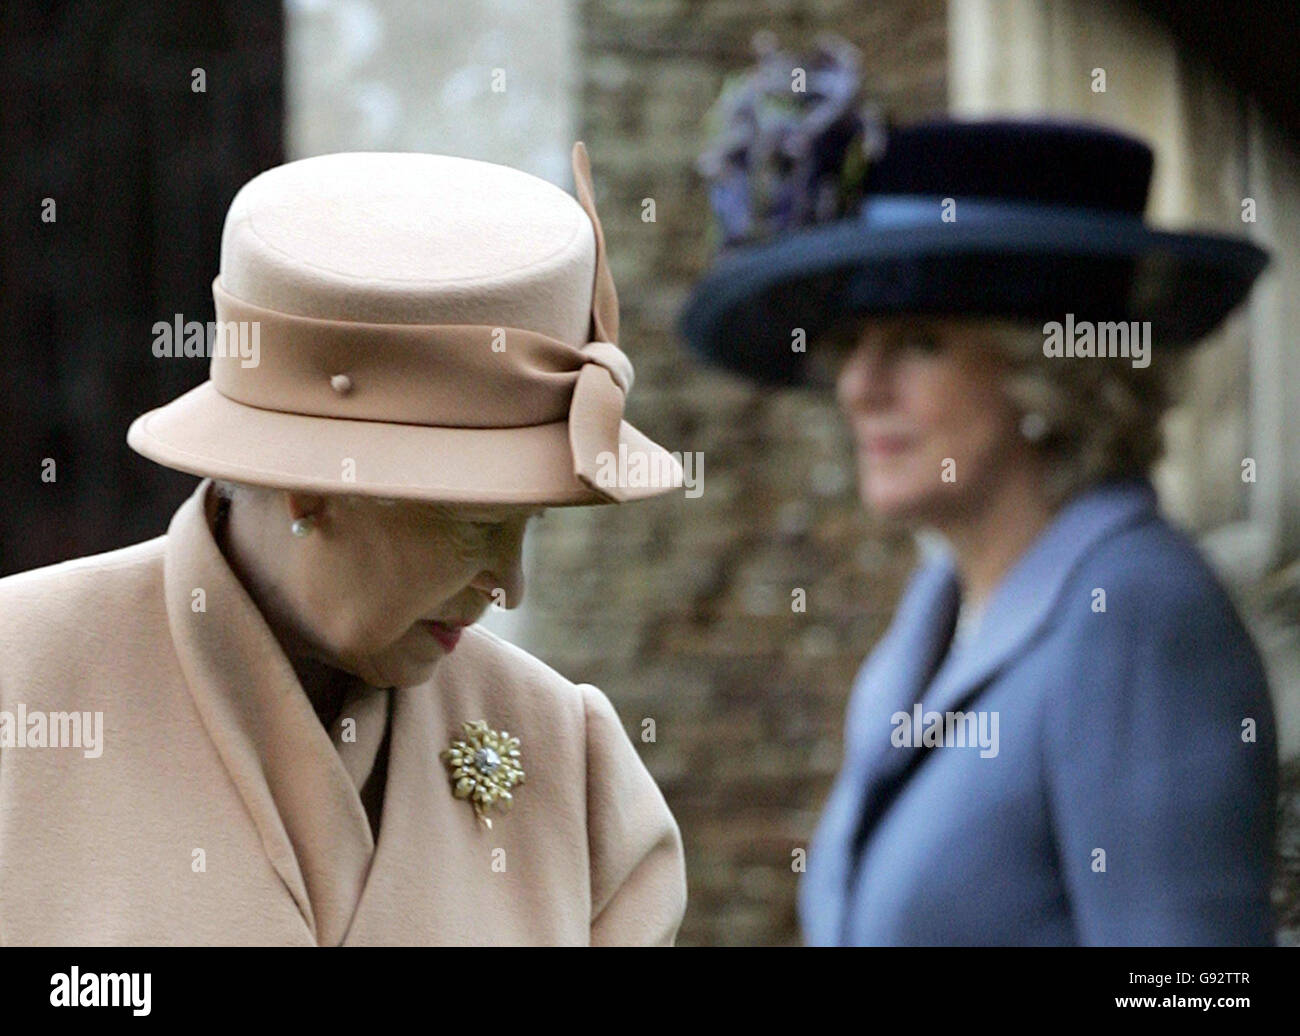 Britain's Queen Elizabeth II (left) and The Duchess of Cornwall leave St Mary Magdalene's Church after the Royal Family's Christmas Day service on the Sandringham estate in Norfolk, Sunday December 25, 2005.S ee PA story ROYAL Church. PRESS ASSOCIATION Photo. Photo credit should read: Toby Melville/Reuters/WPAl/PA. Stock Photo